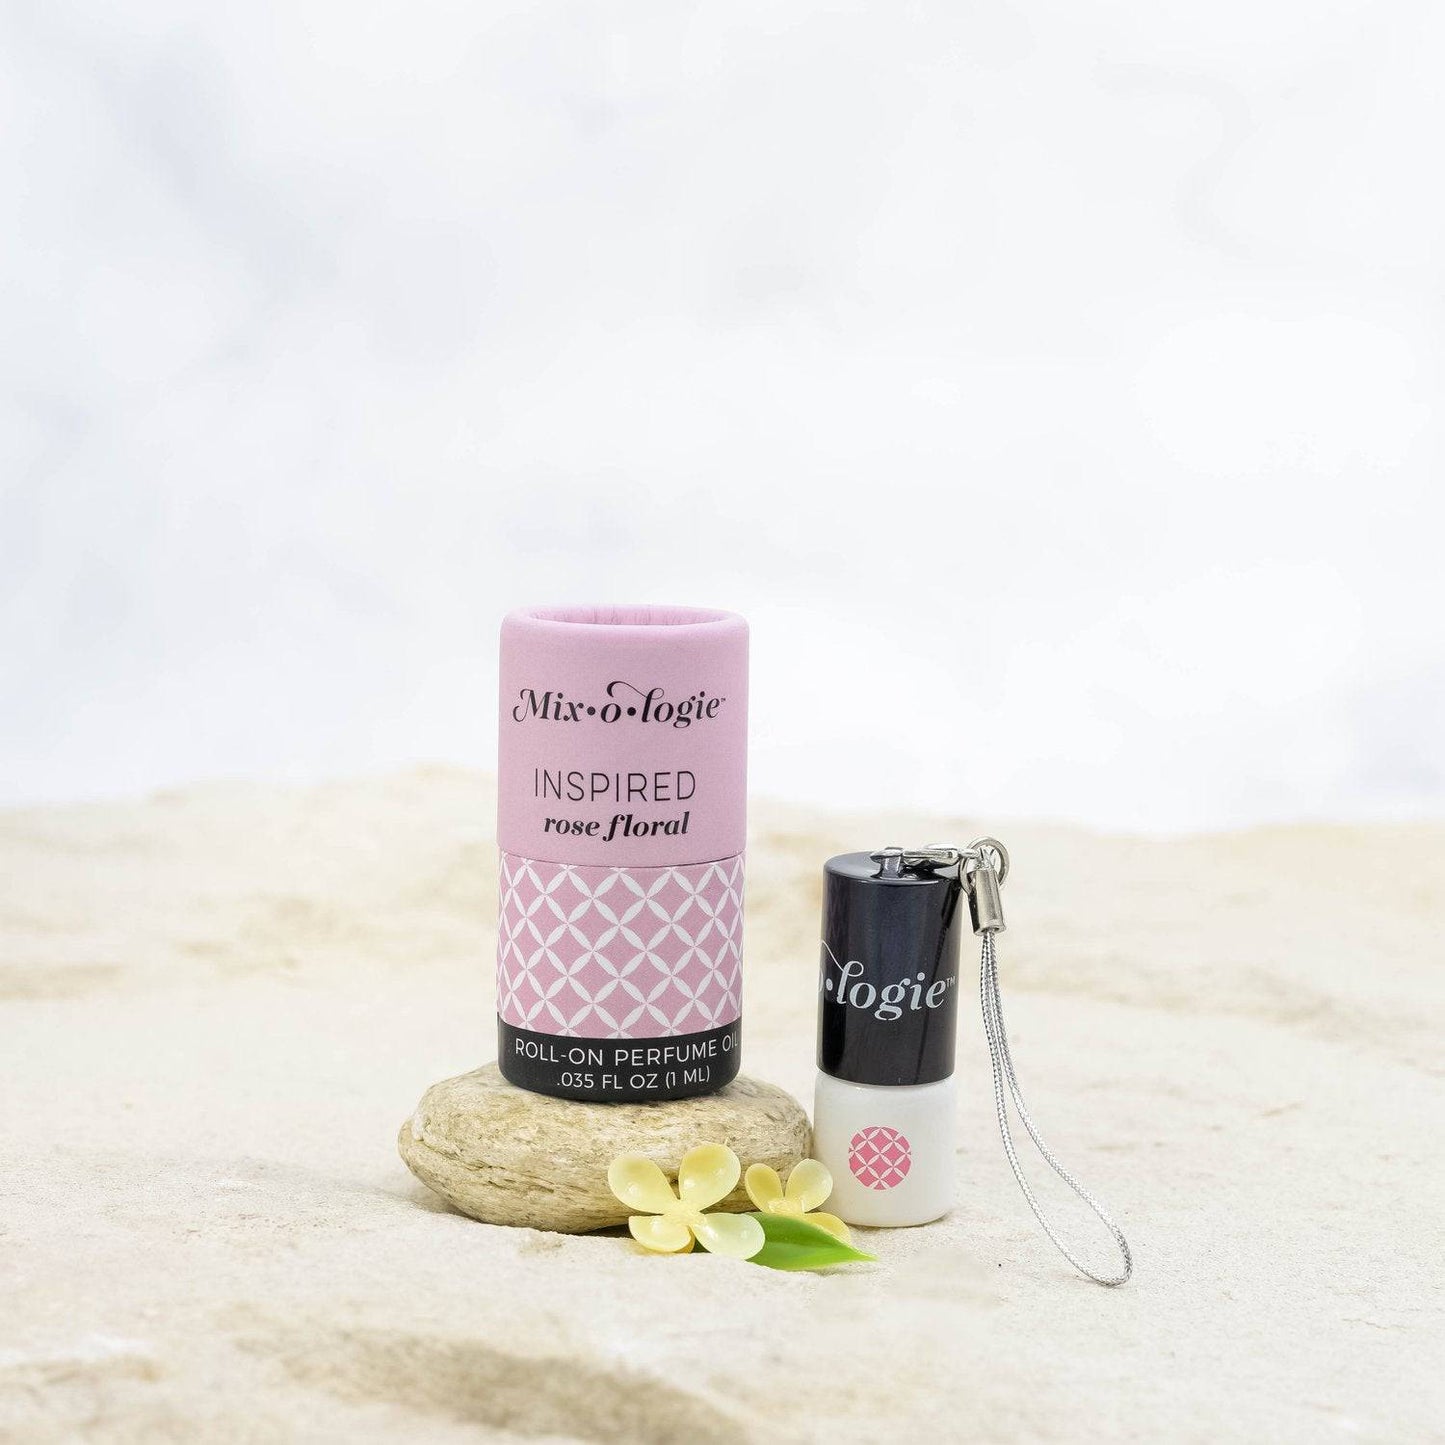 Mixologie - Inspired (rose floral) - Mini Perfume Rollerball Keychain (1 mL)